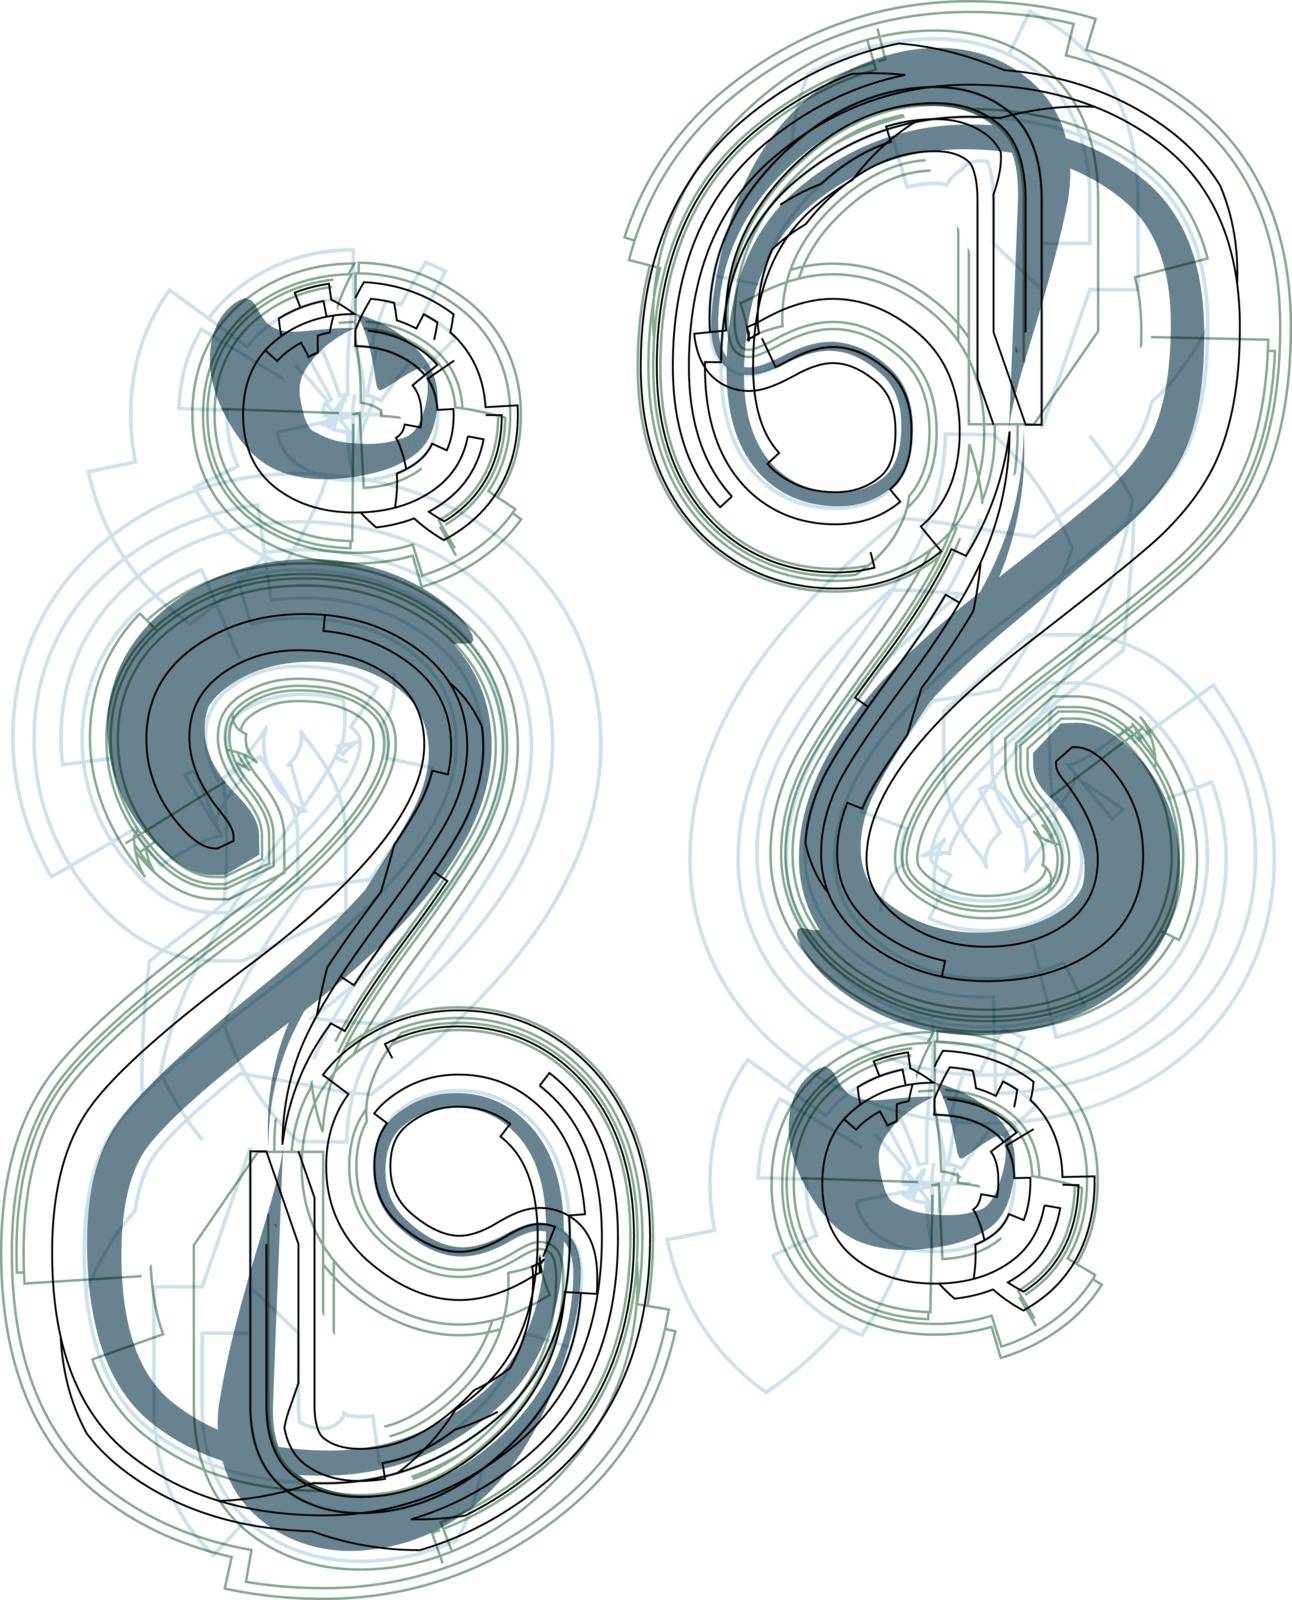 Abstract Question Mark vector illustration